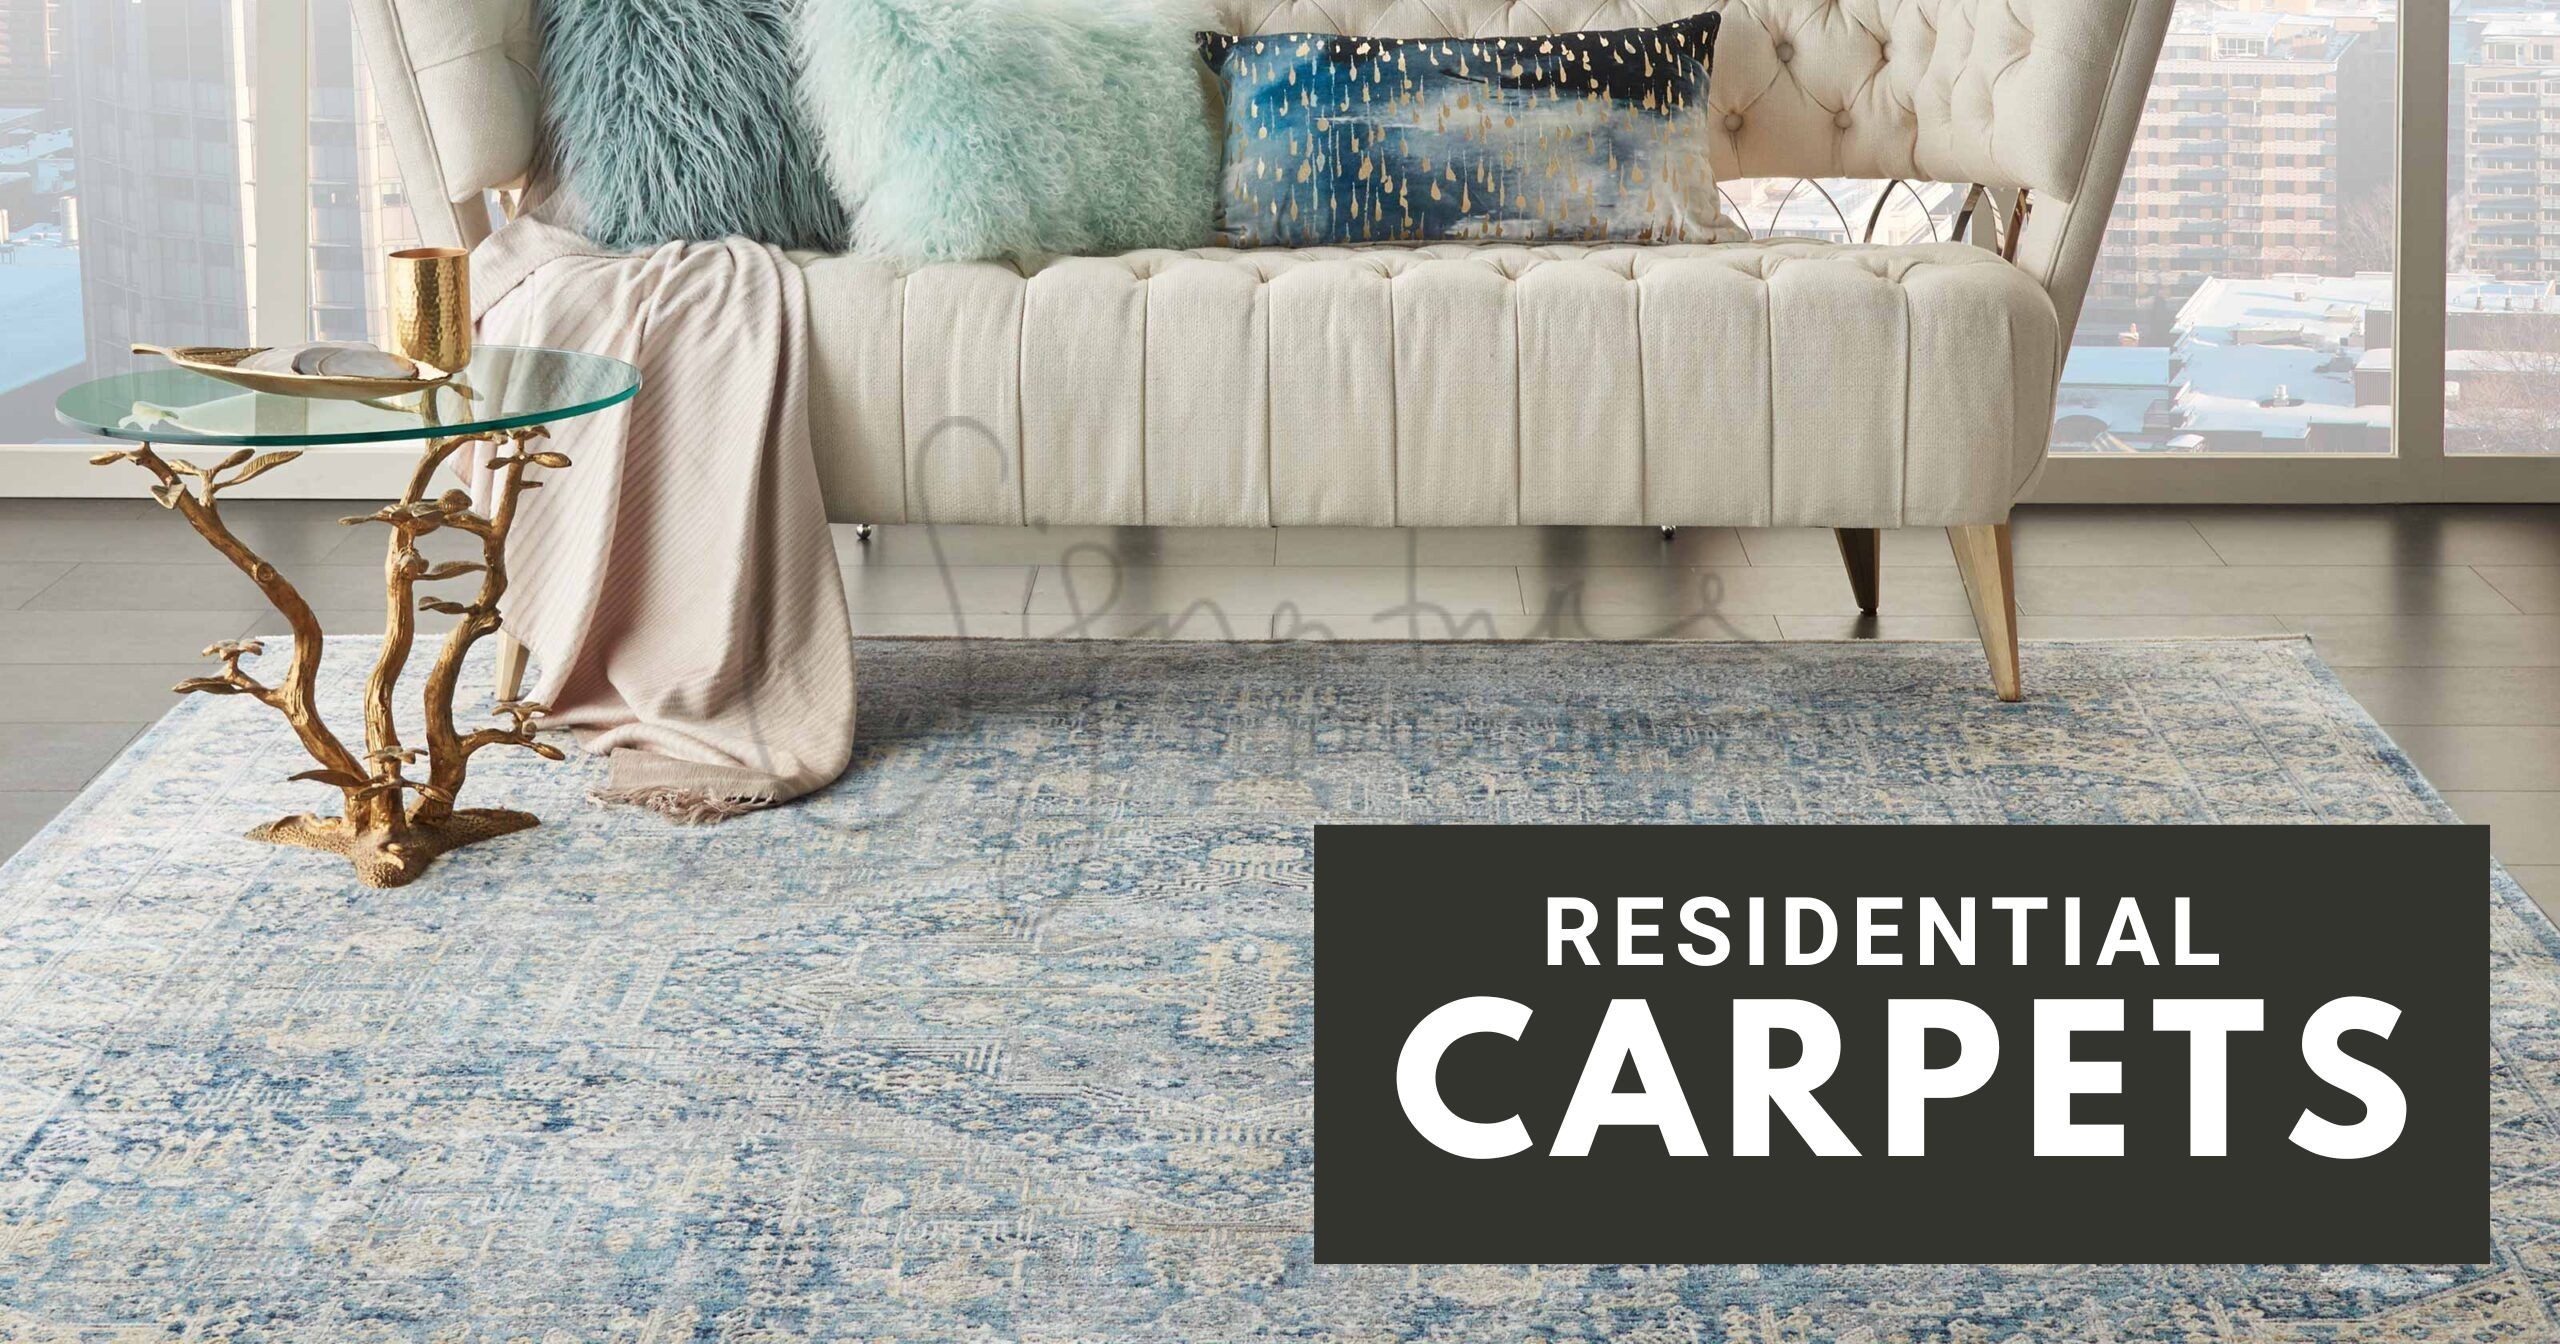 Transform Your Home with Signature Floors' High-Quality Residential Carpets